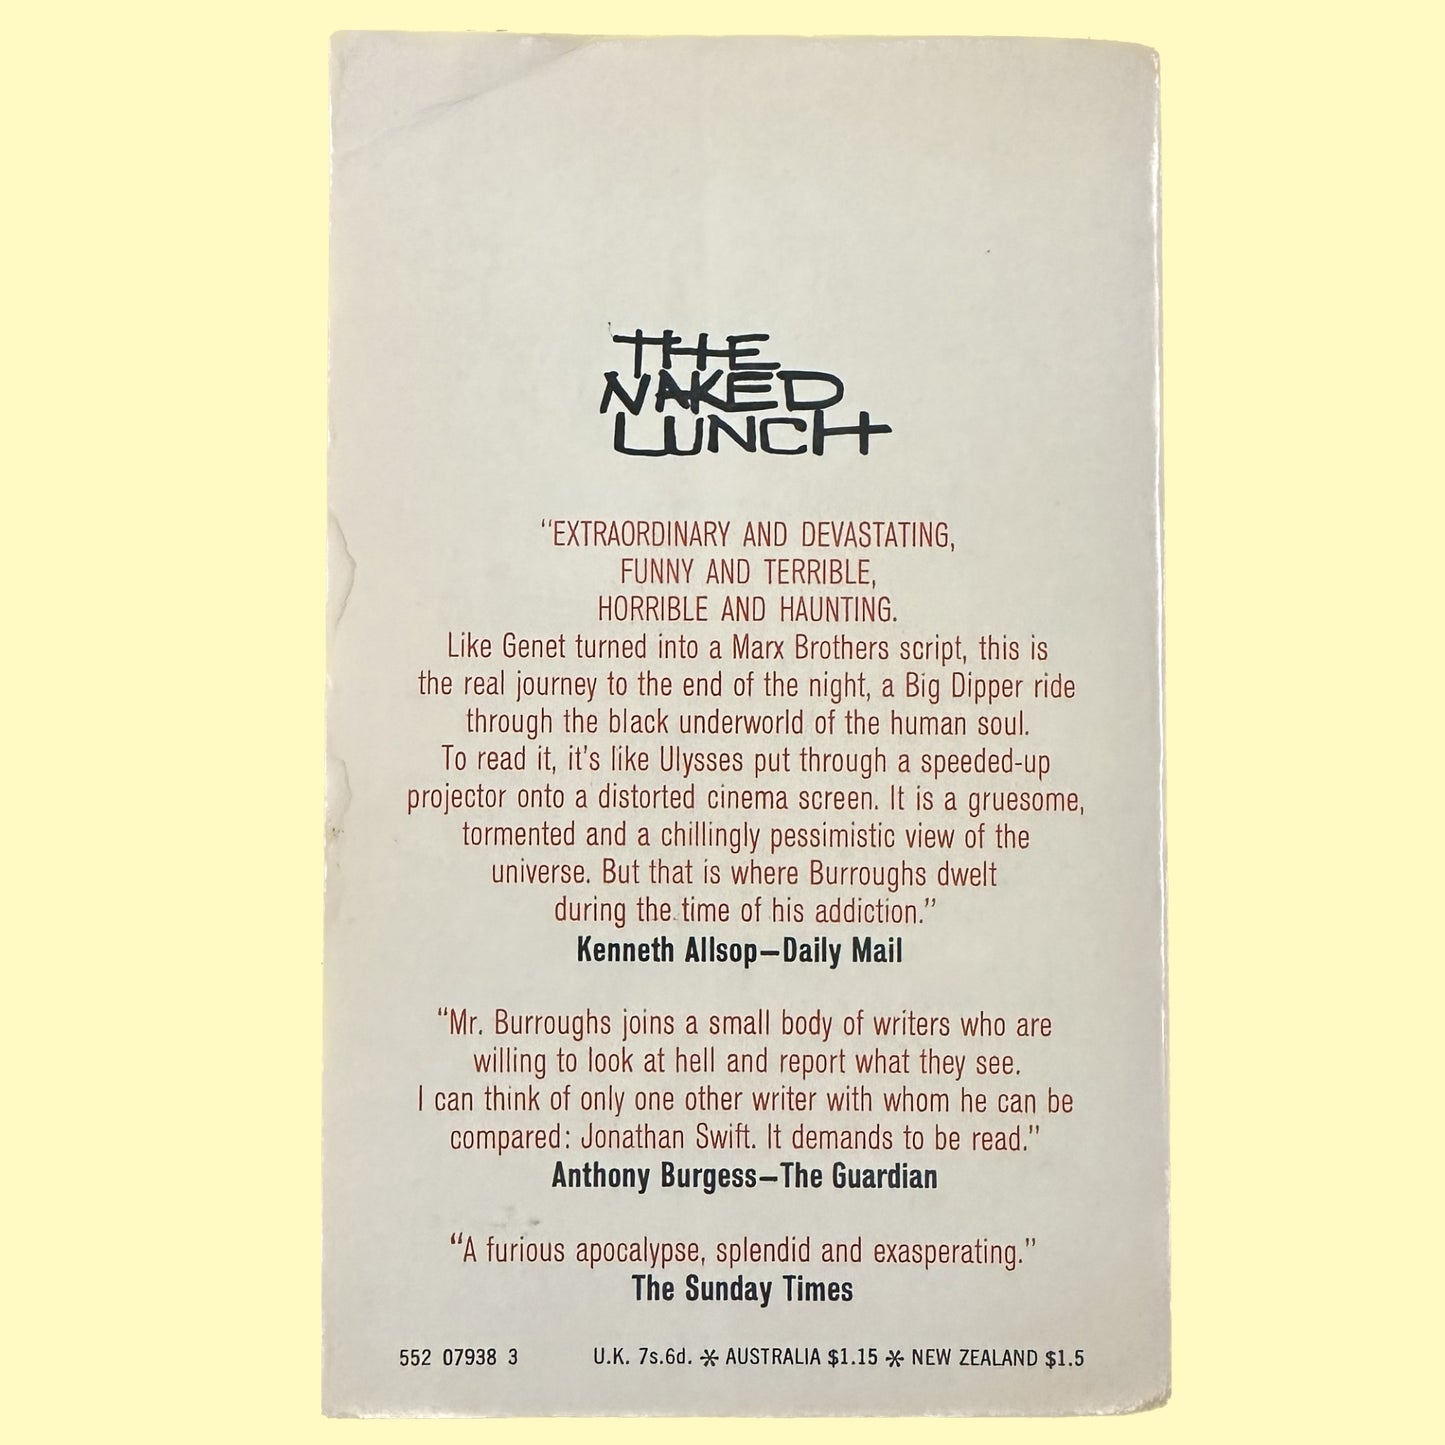 The Naked Lunch by William Burroughs, 1968